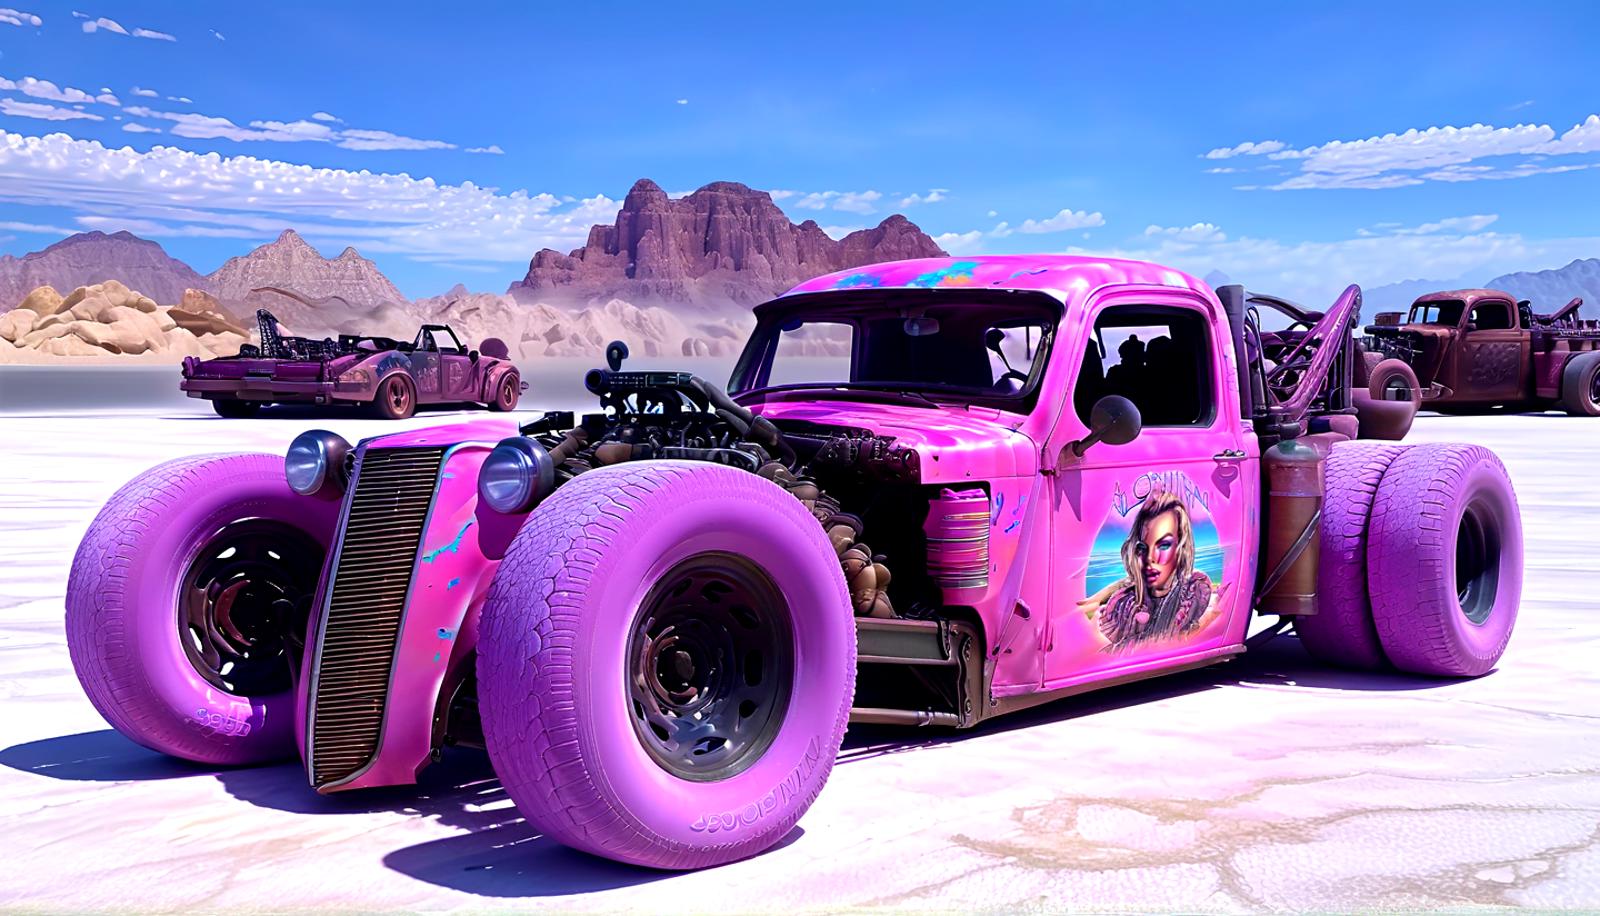 Rat Rod - The Wrecker From Hell (1936 Plymouth) [SDXL] image by denrakeiw